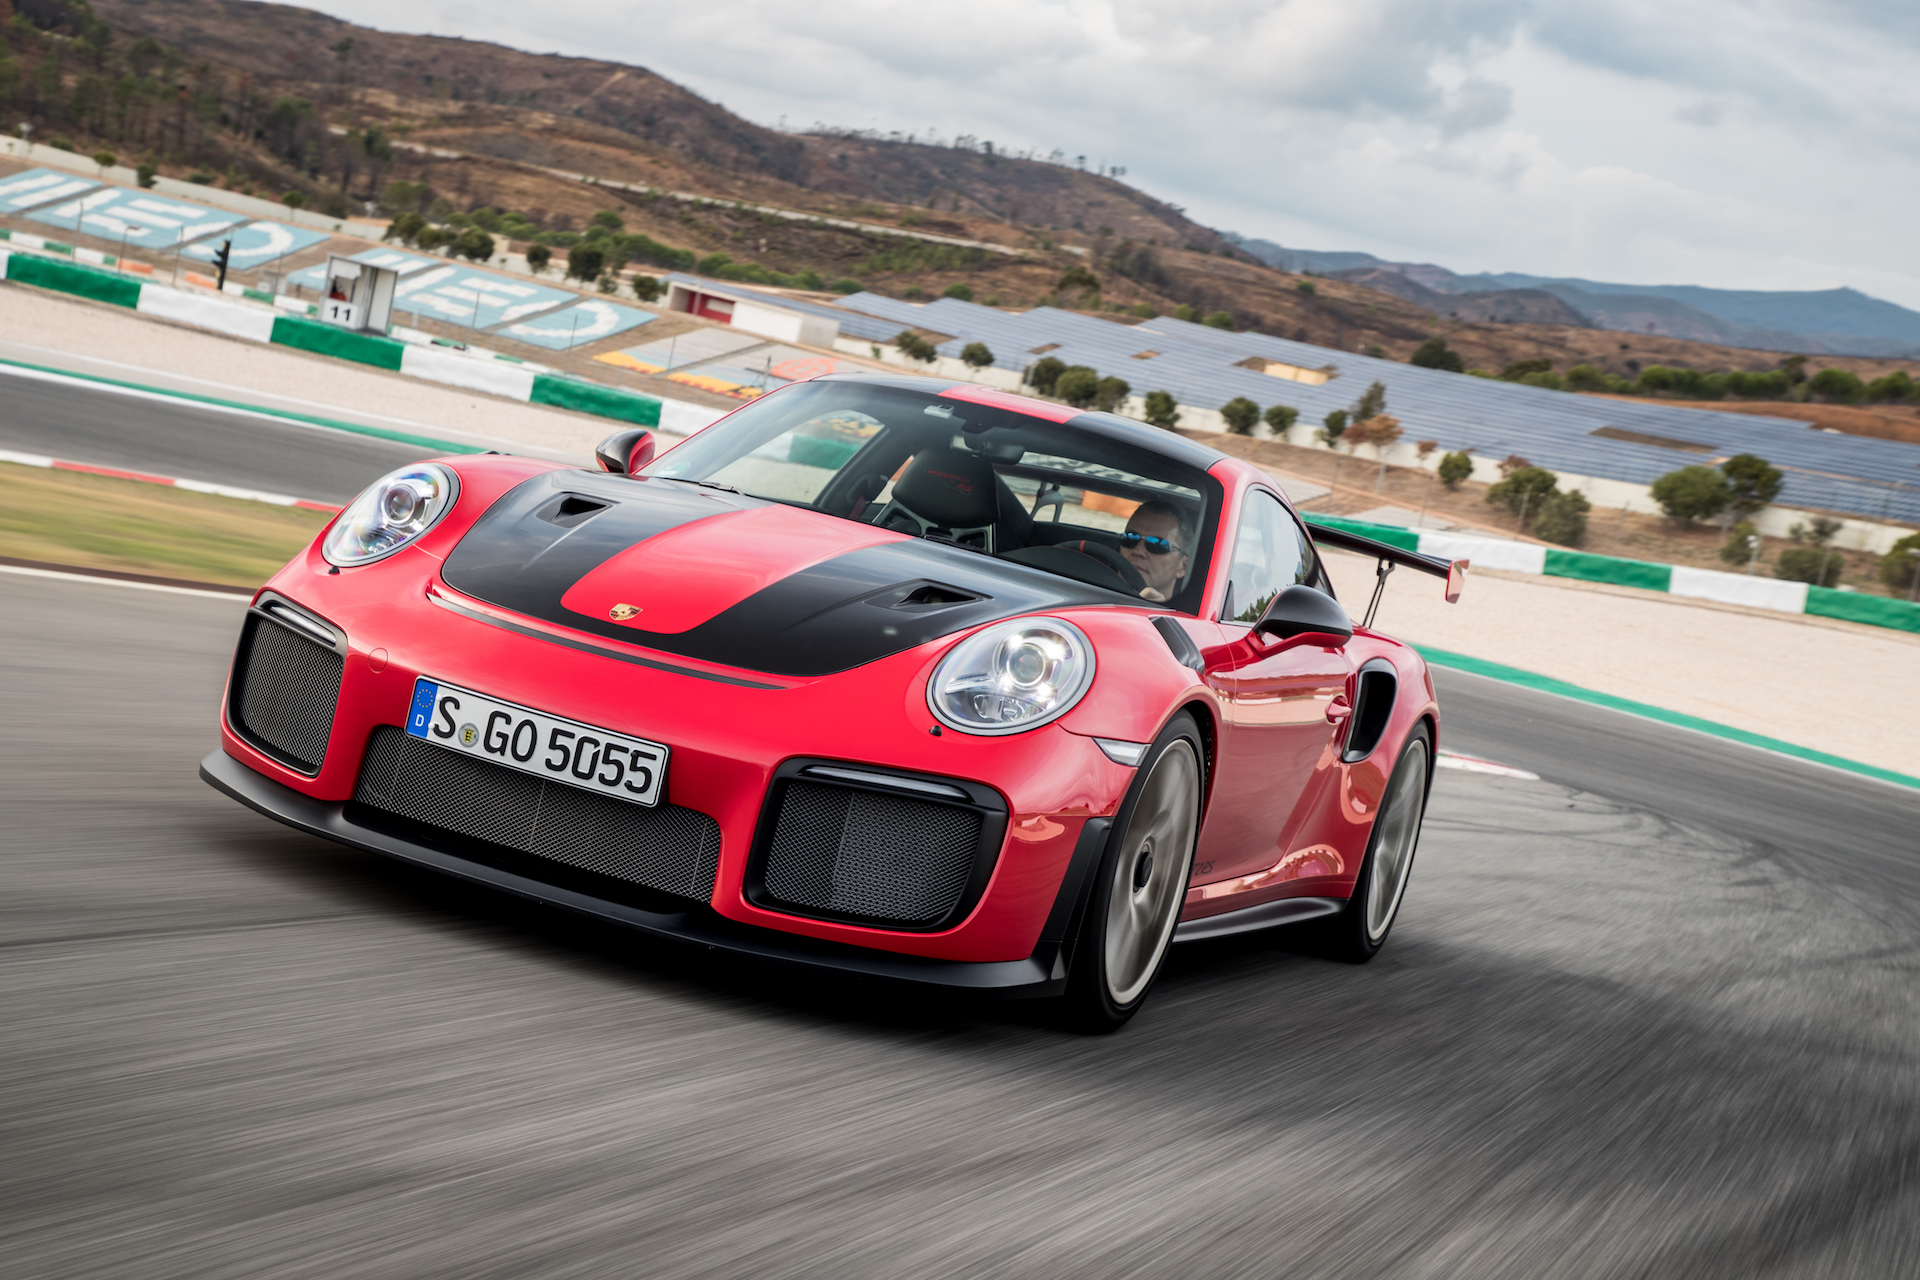 2018 Porsche 911 GT2 RS first drive review: fierce and focused